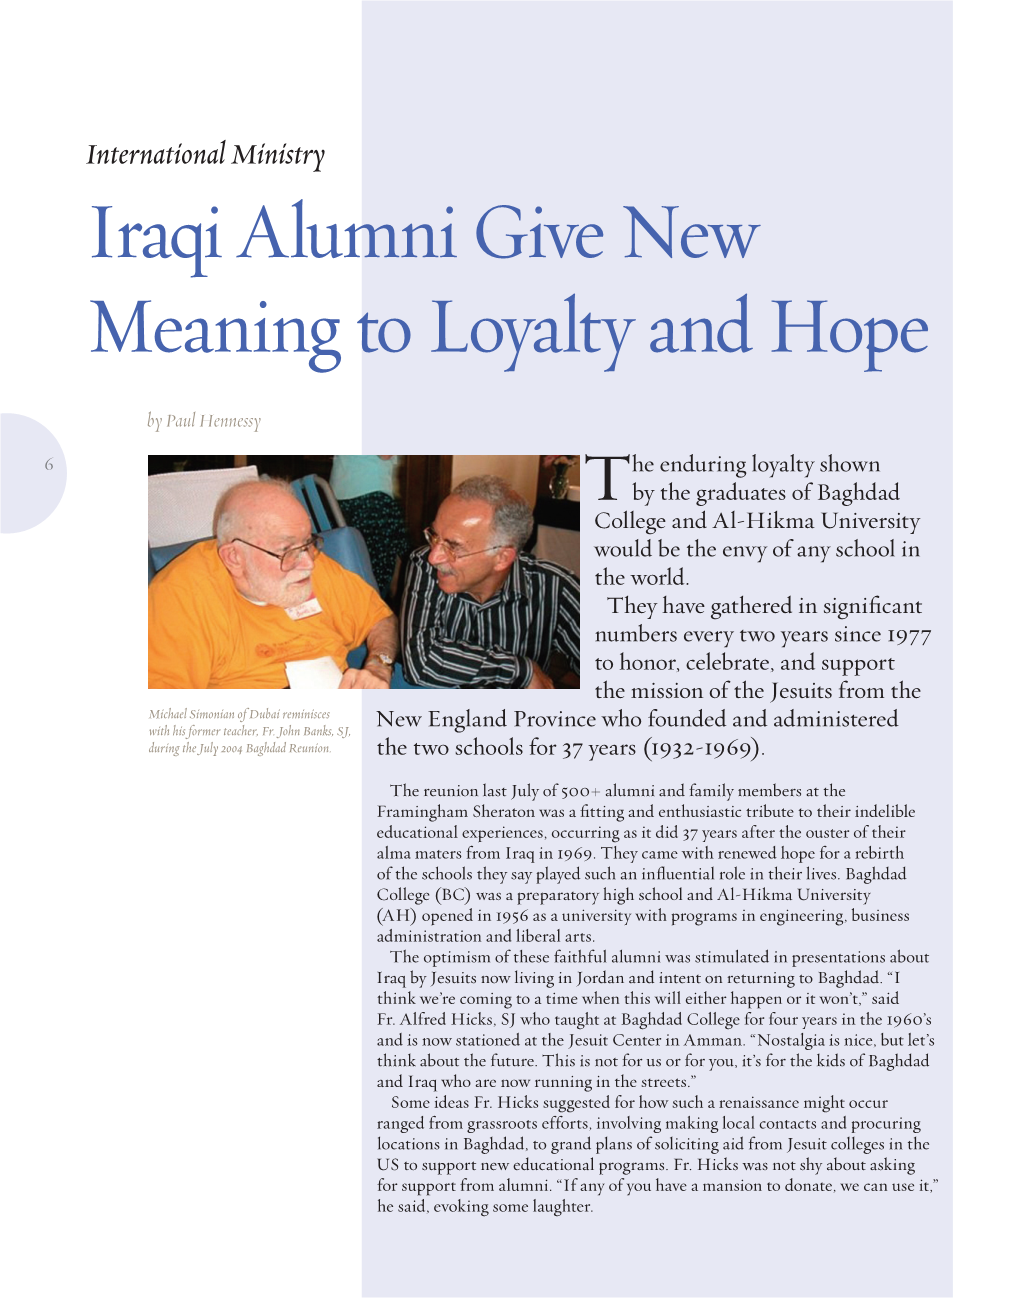 Iraqi Alumni Give New Meaning to Loyalty and Hope